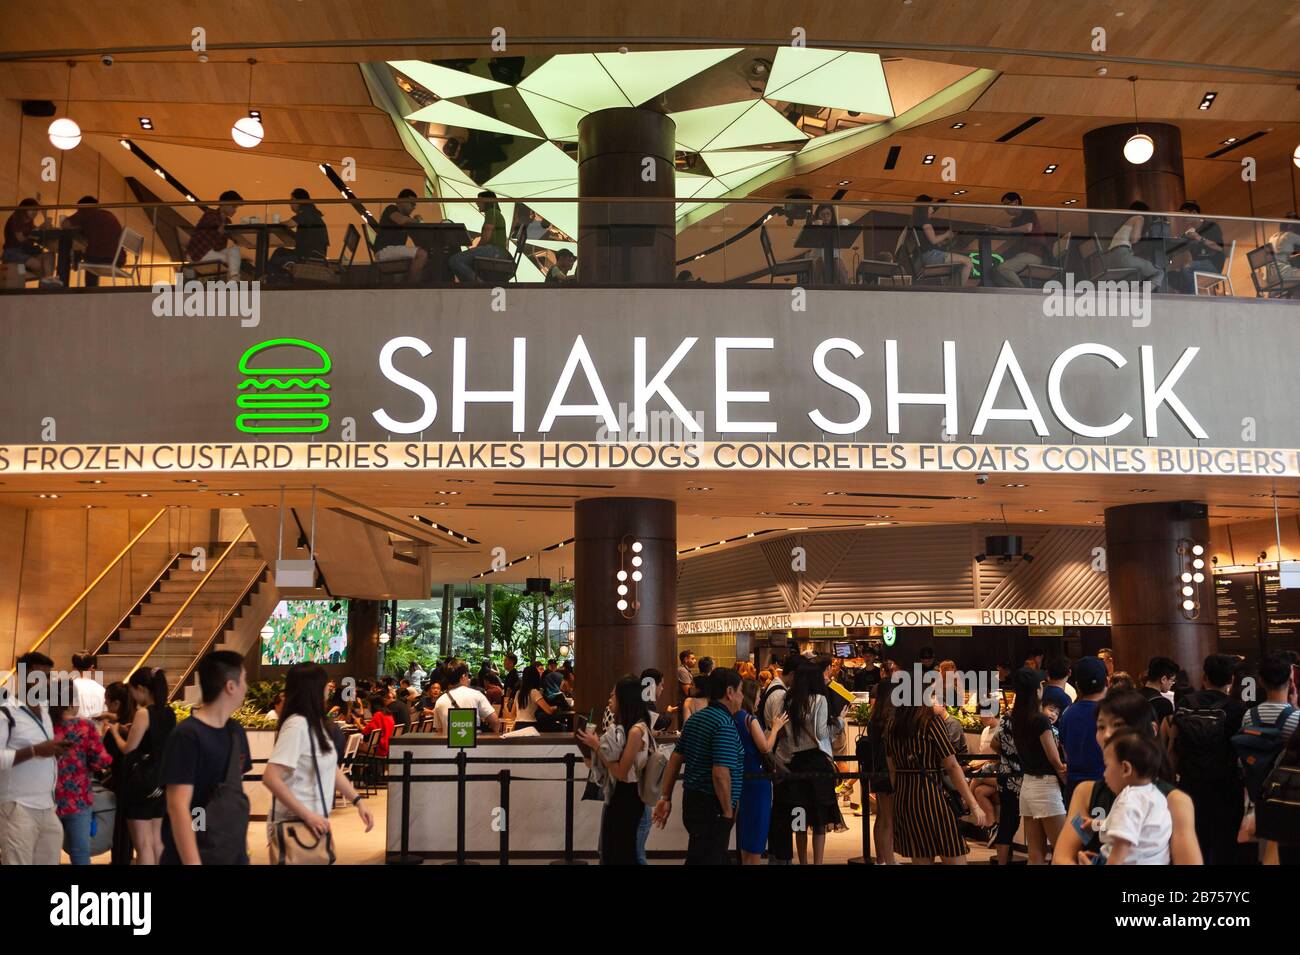 28.04.2019, Singapore, Republic of Singapore, Asia - The first fast food restaurant of the Shake Shack chain in Singapore in the new Jewel Terminal at Changi Airport. [automated translation] Stock Photo